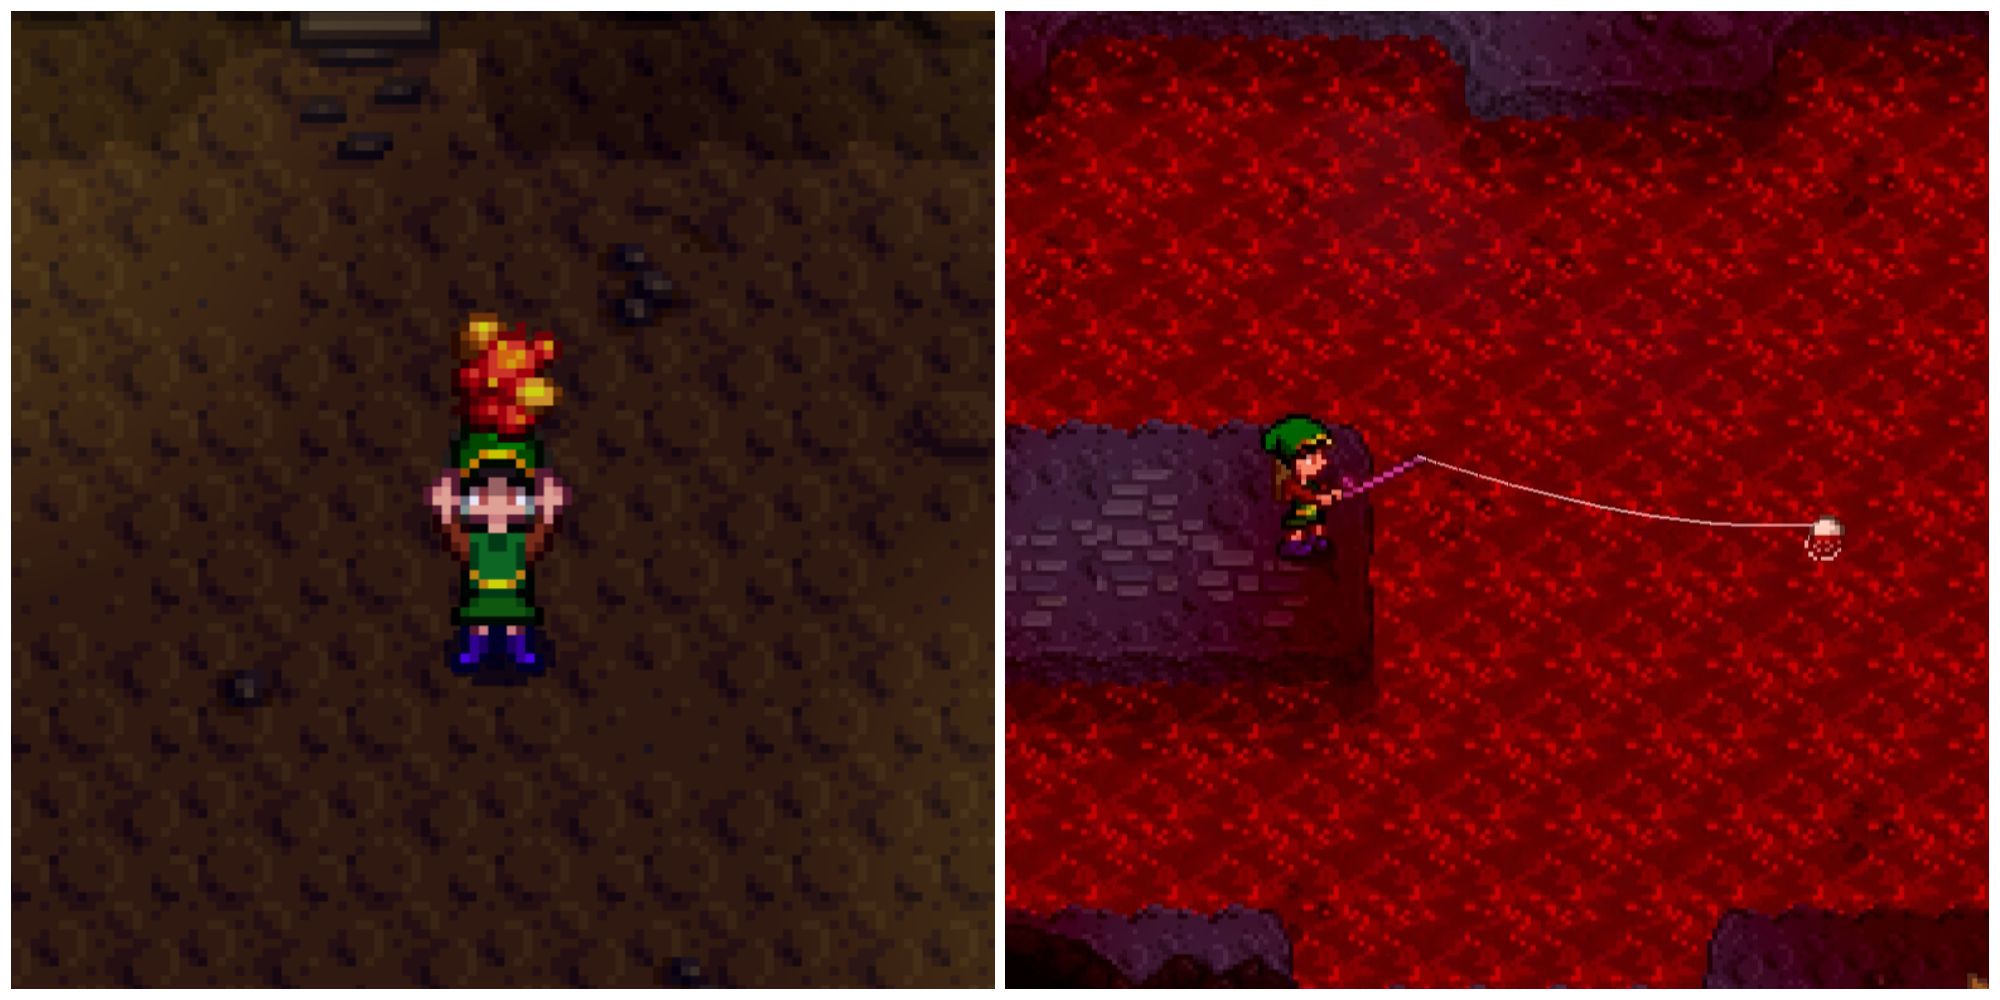 Split image of a character holding up a Cave Jelly and a character fishing in The Mines in Stardew Valley